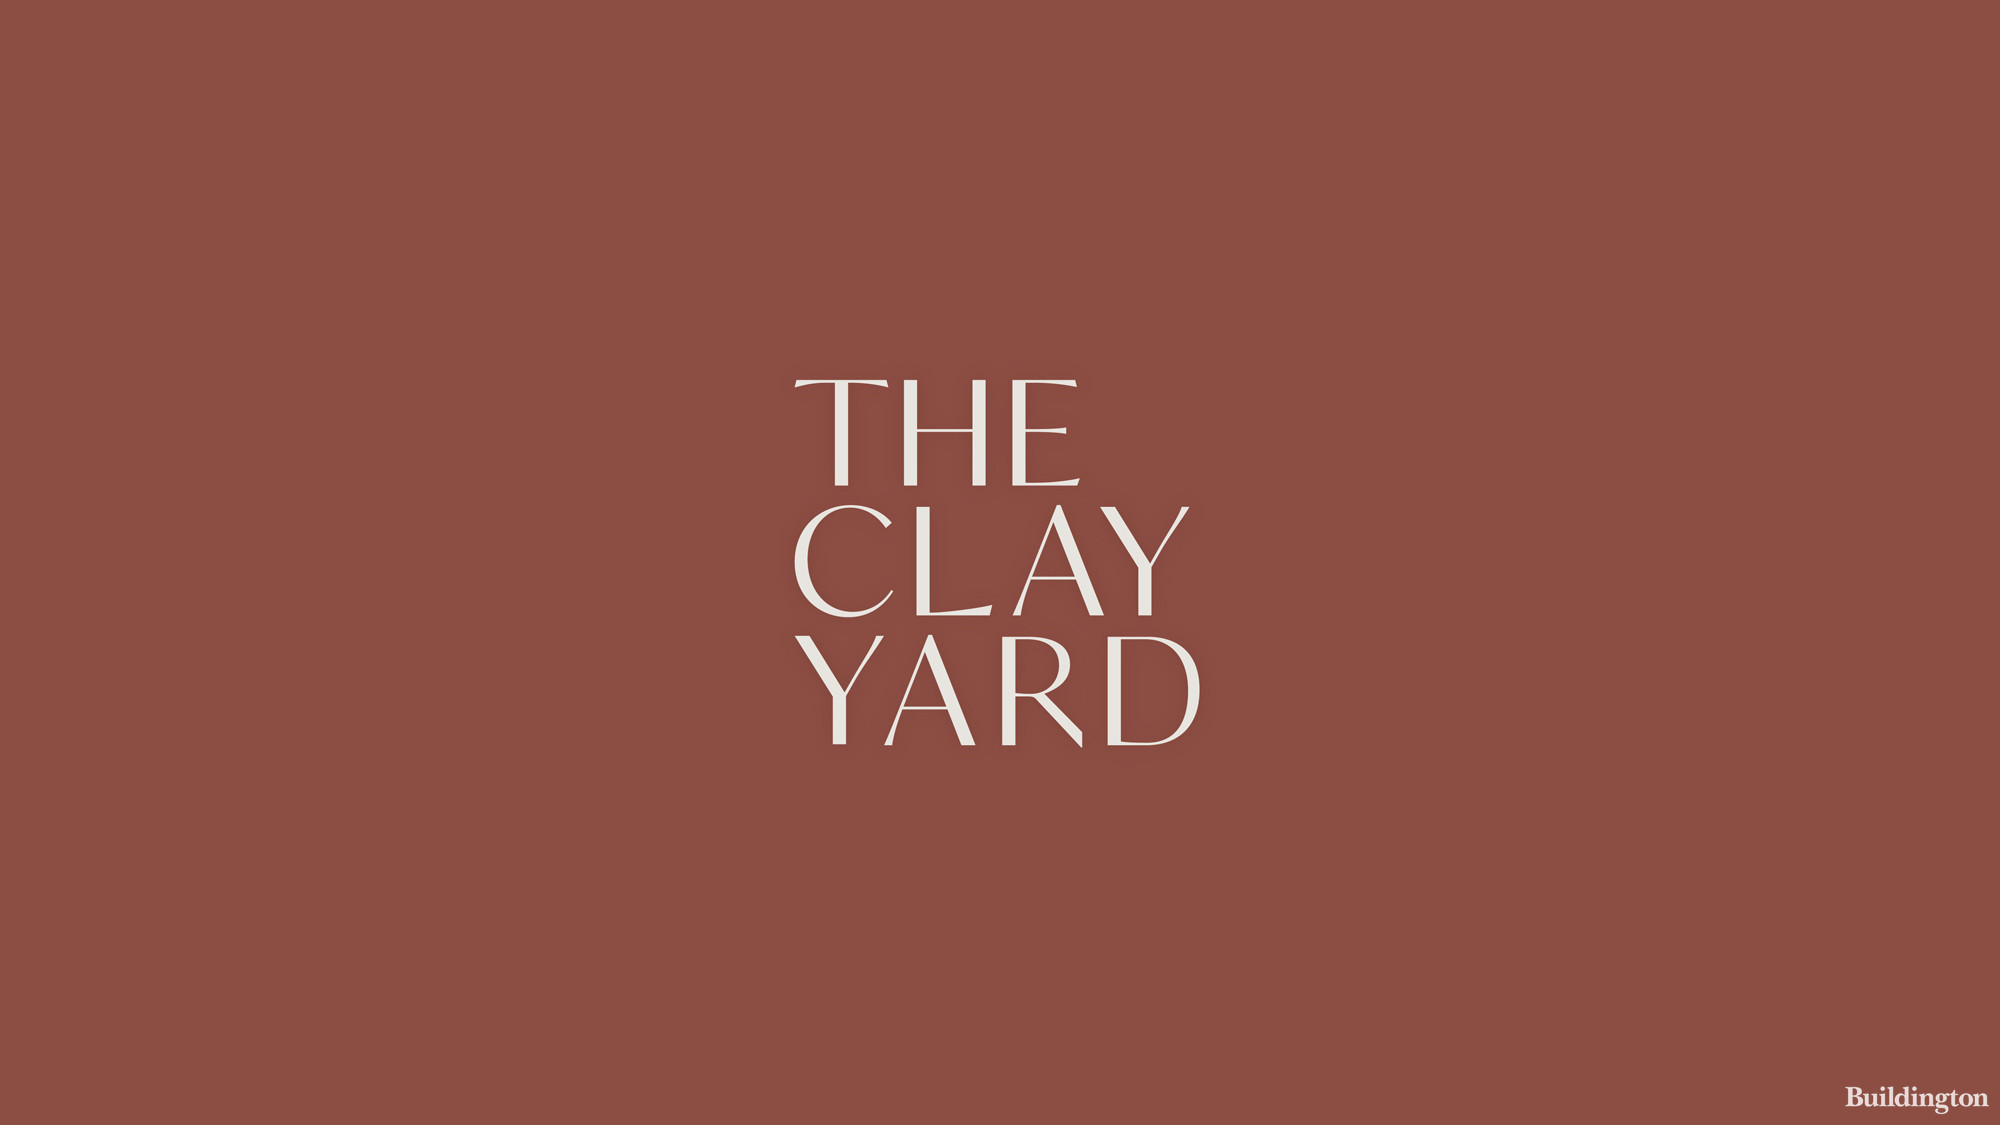 The Clay Yard development cover image.